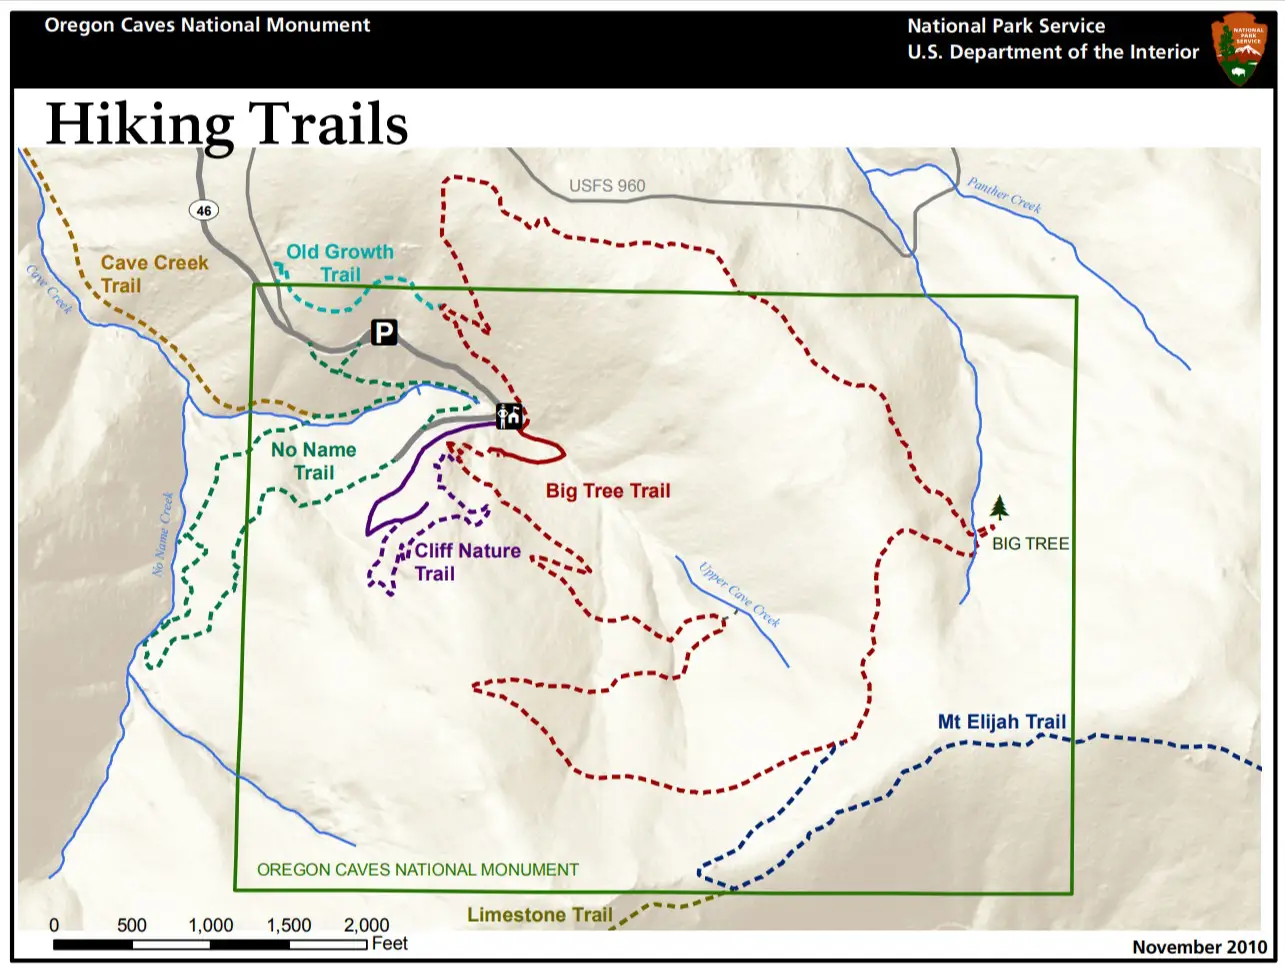 Oregon Caves National Monument Hiking Trails Map